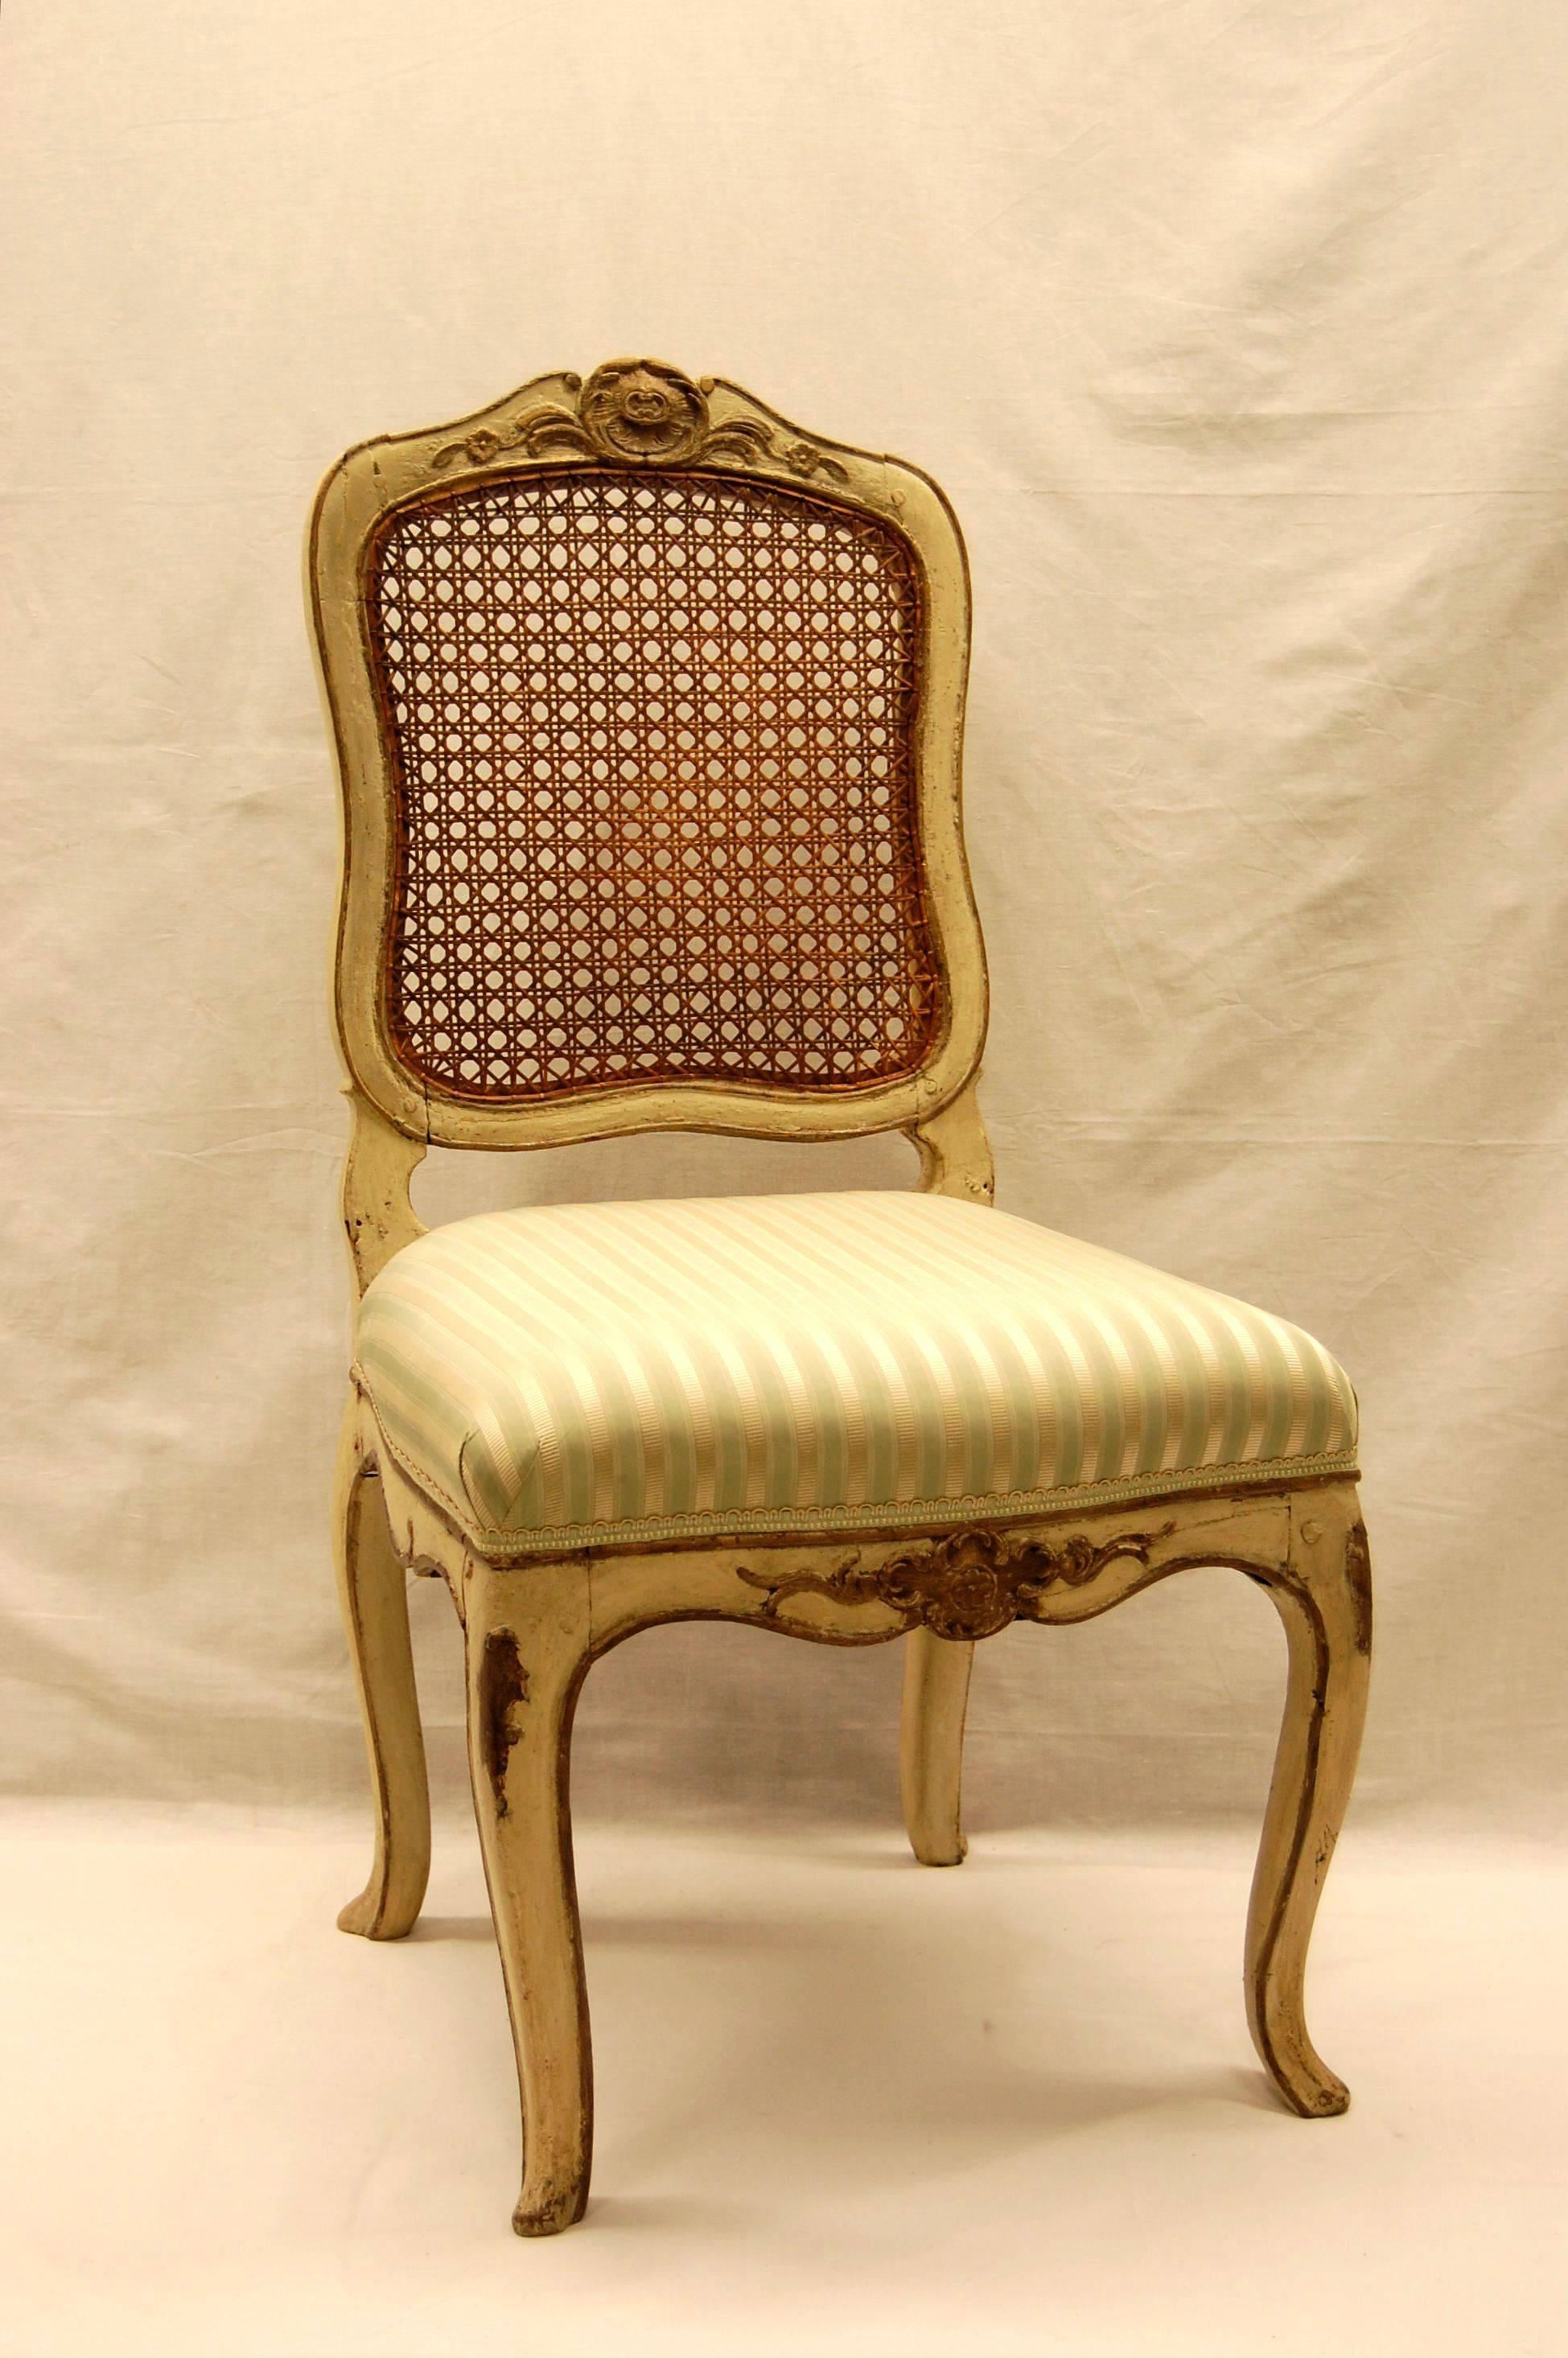 Italian version of a Louis XV type chair in original paint, likely Venetian, circa 1800. Covered in Scalamandre silk stripe, color: Celadon.